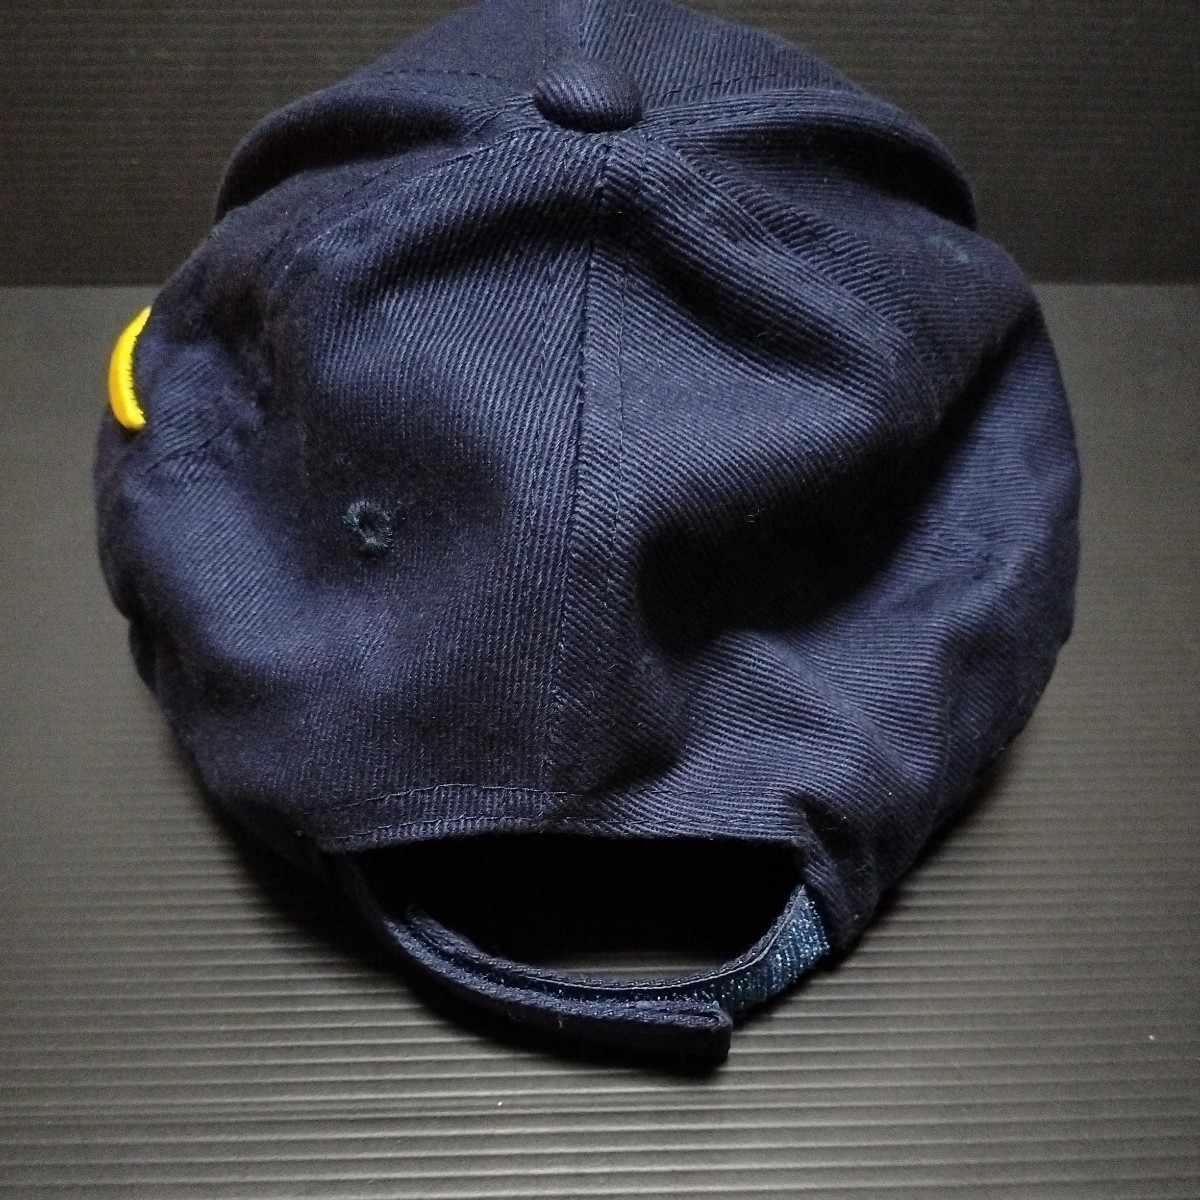 * GOOD YEAR[ cap ] Goodyear hat embroidery 